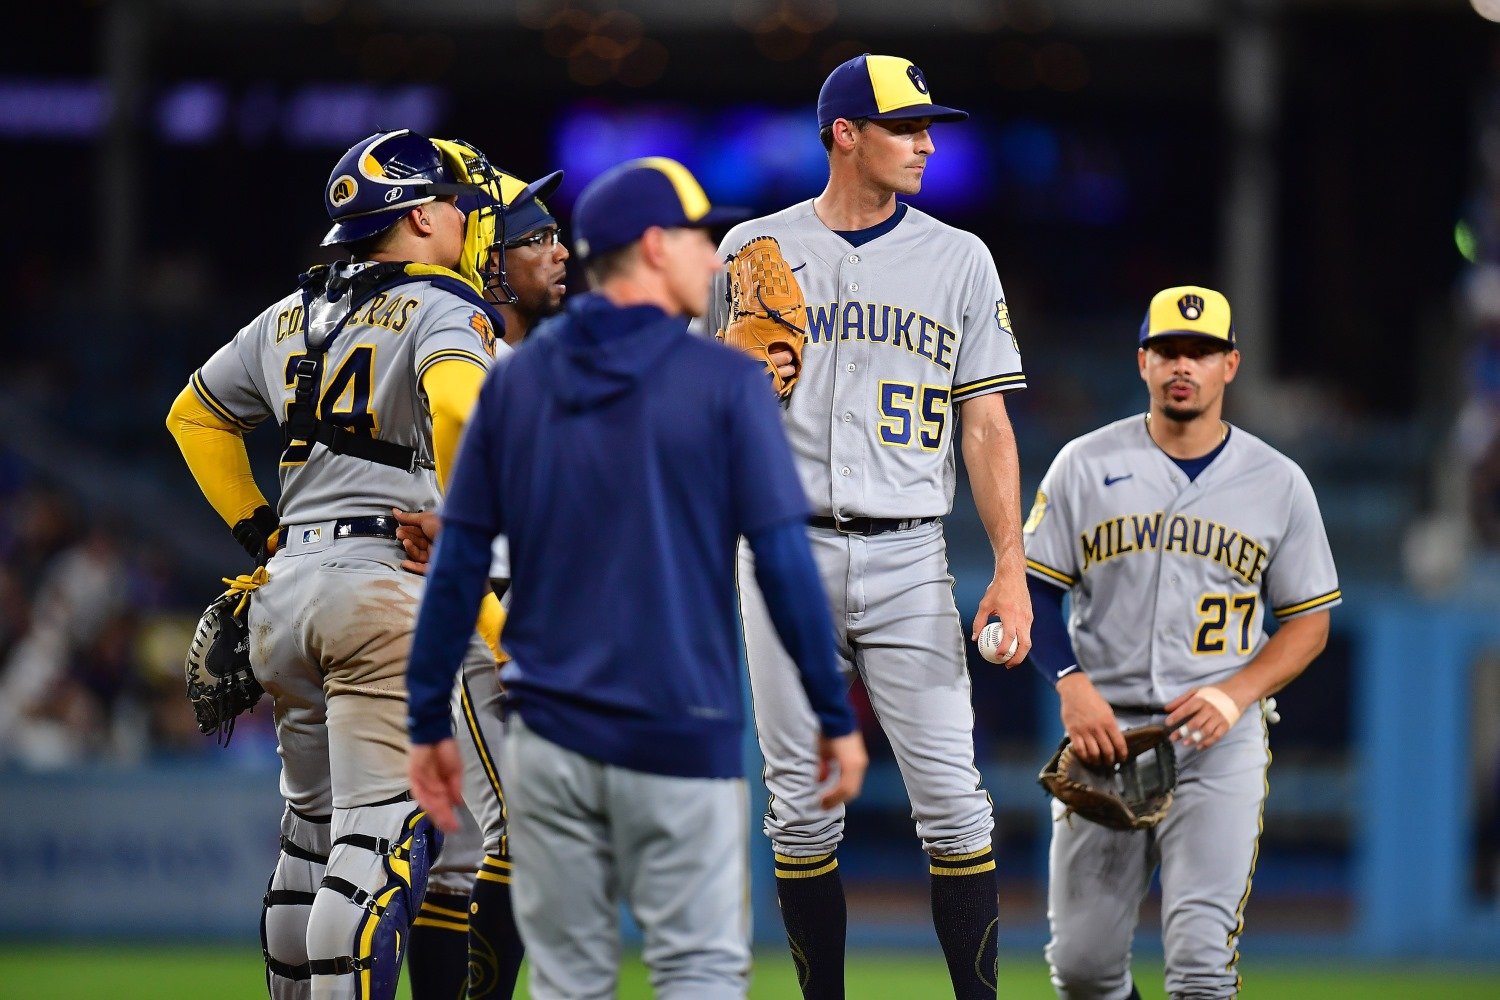 Brewers fall to Mets in game two, 7-2 - Brew Crew Ball